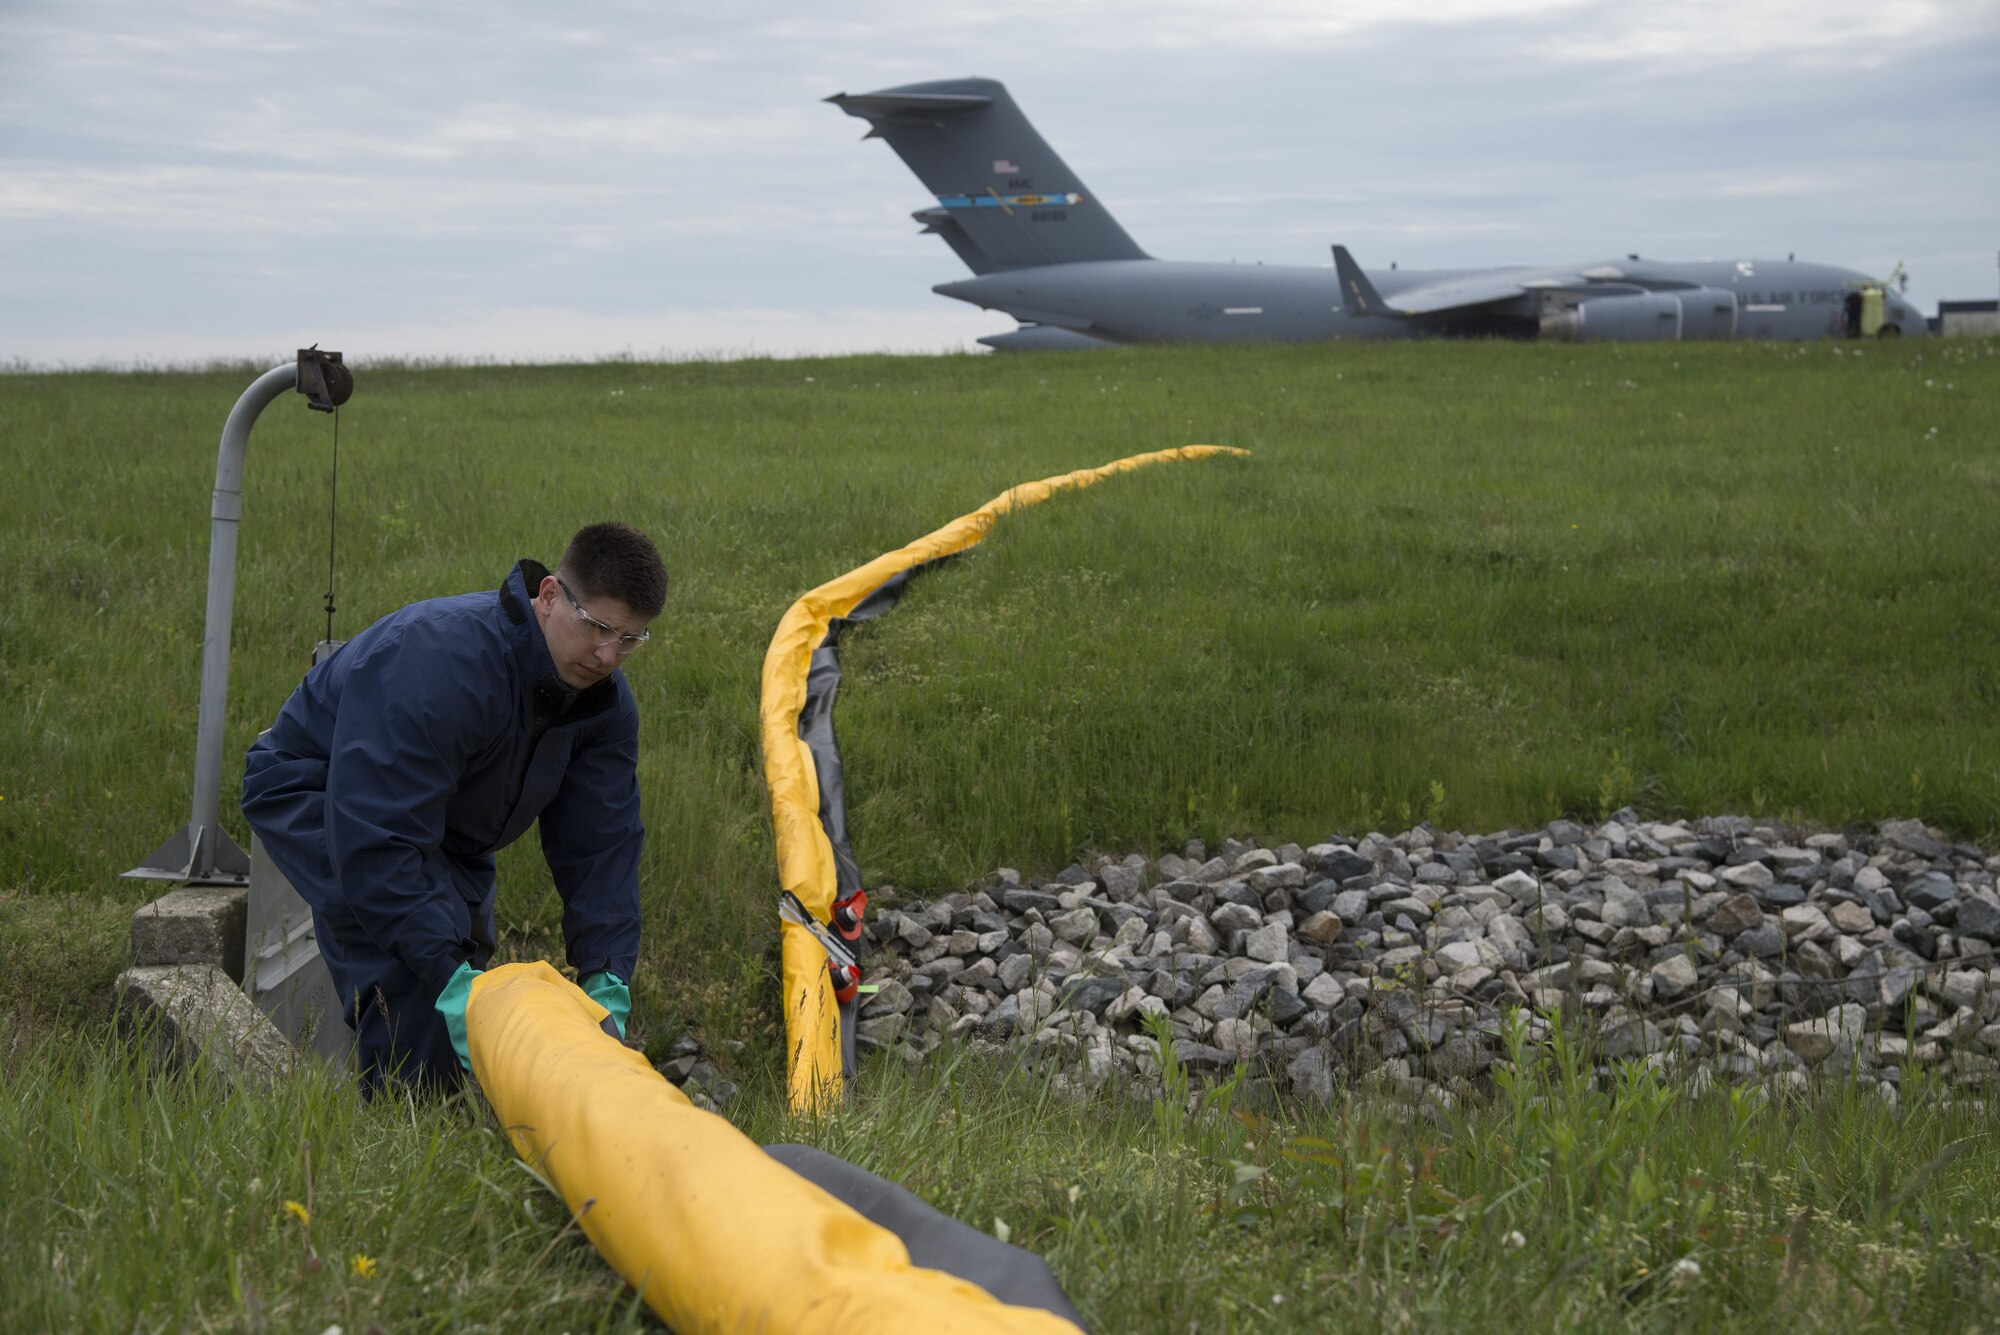 Staff Sgt. Robert Simpson, 436th Civil Engineer Squadron Infrastructure and Utilities water and fuel systems maintenance technician, places a containment boom during a fuel spill exercise April 20, 2017, at a flightline drainage spill gate on Dover Air Force Base, Del. The containment boom is specially designed to work on both land and water to keep spilled fuel in a controlled area. (U.S. Air Force photo by Senior Airman Aaron J. Jenne)